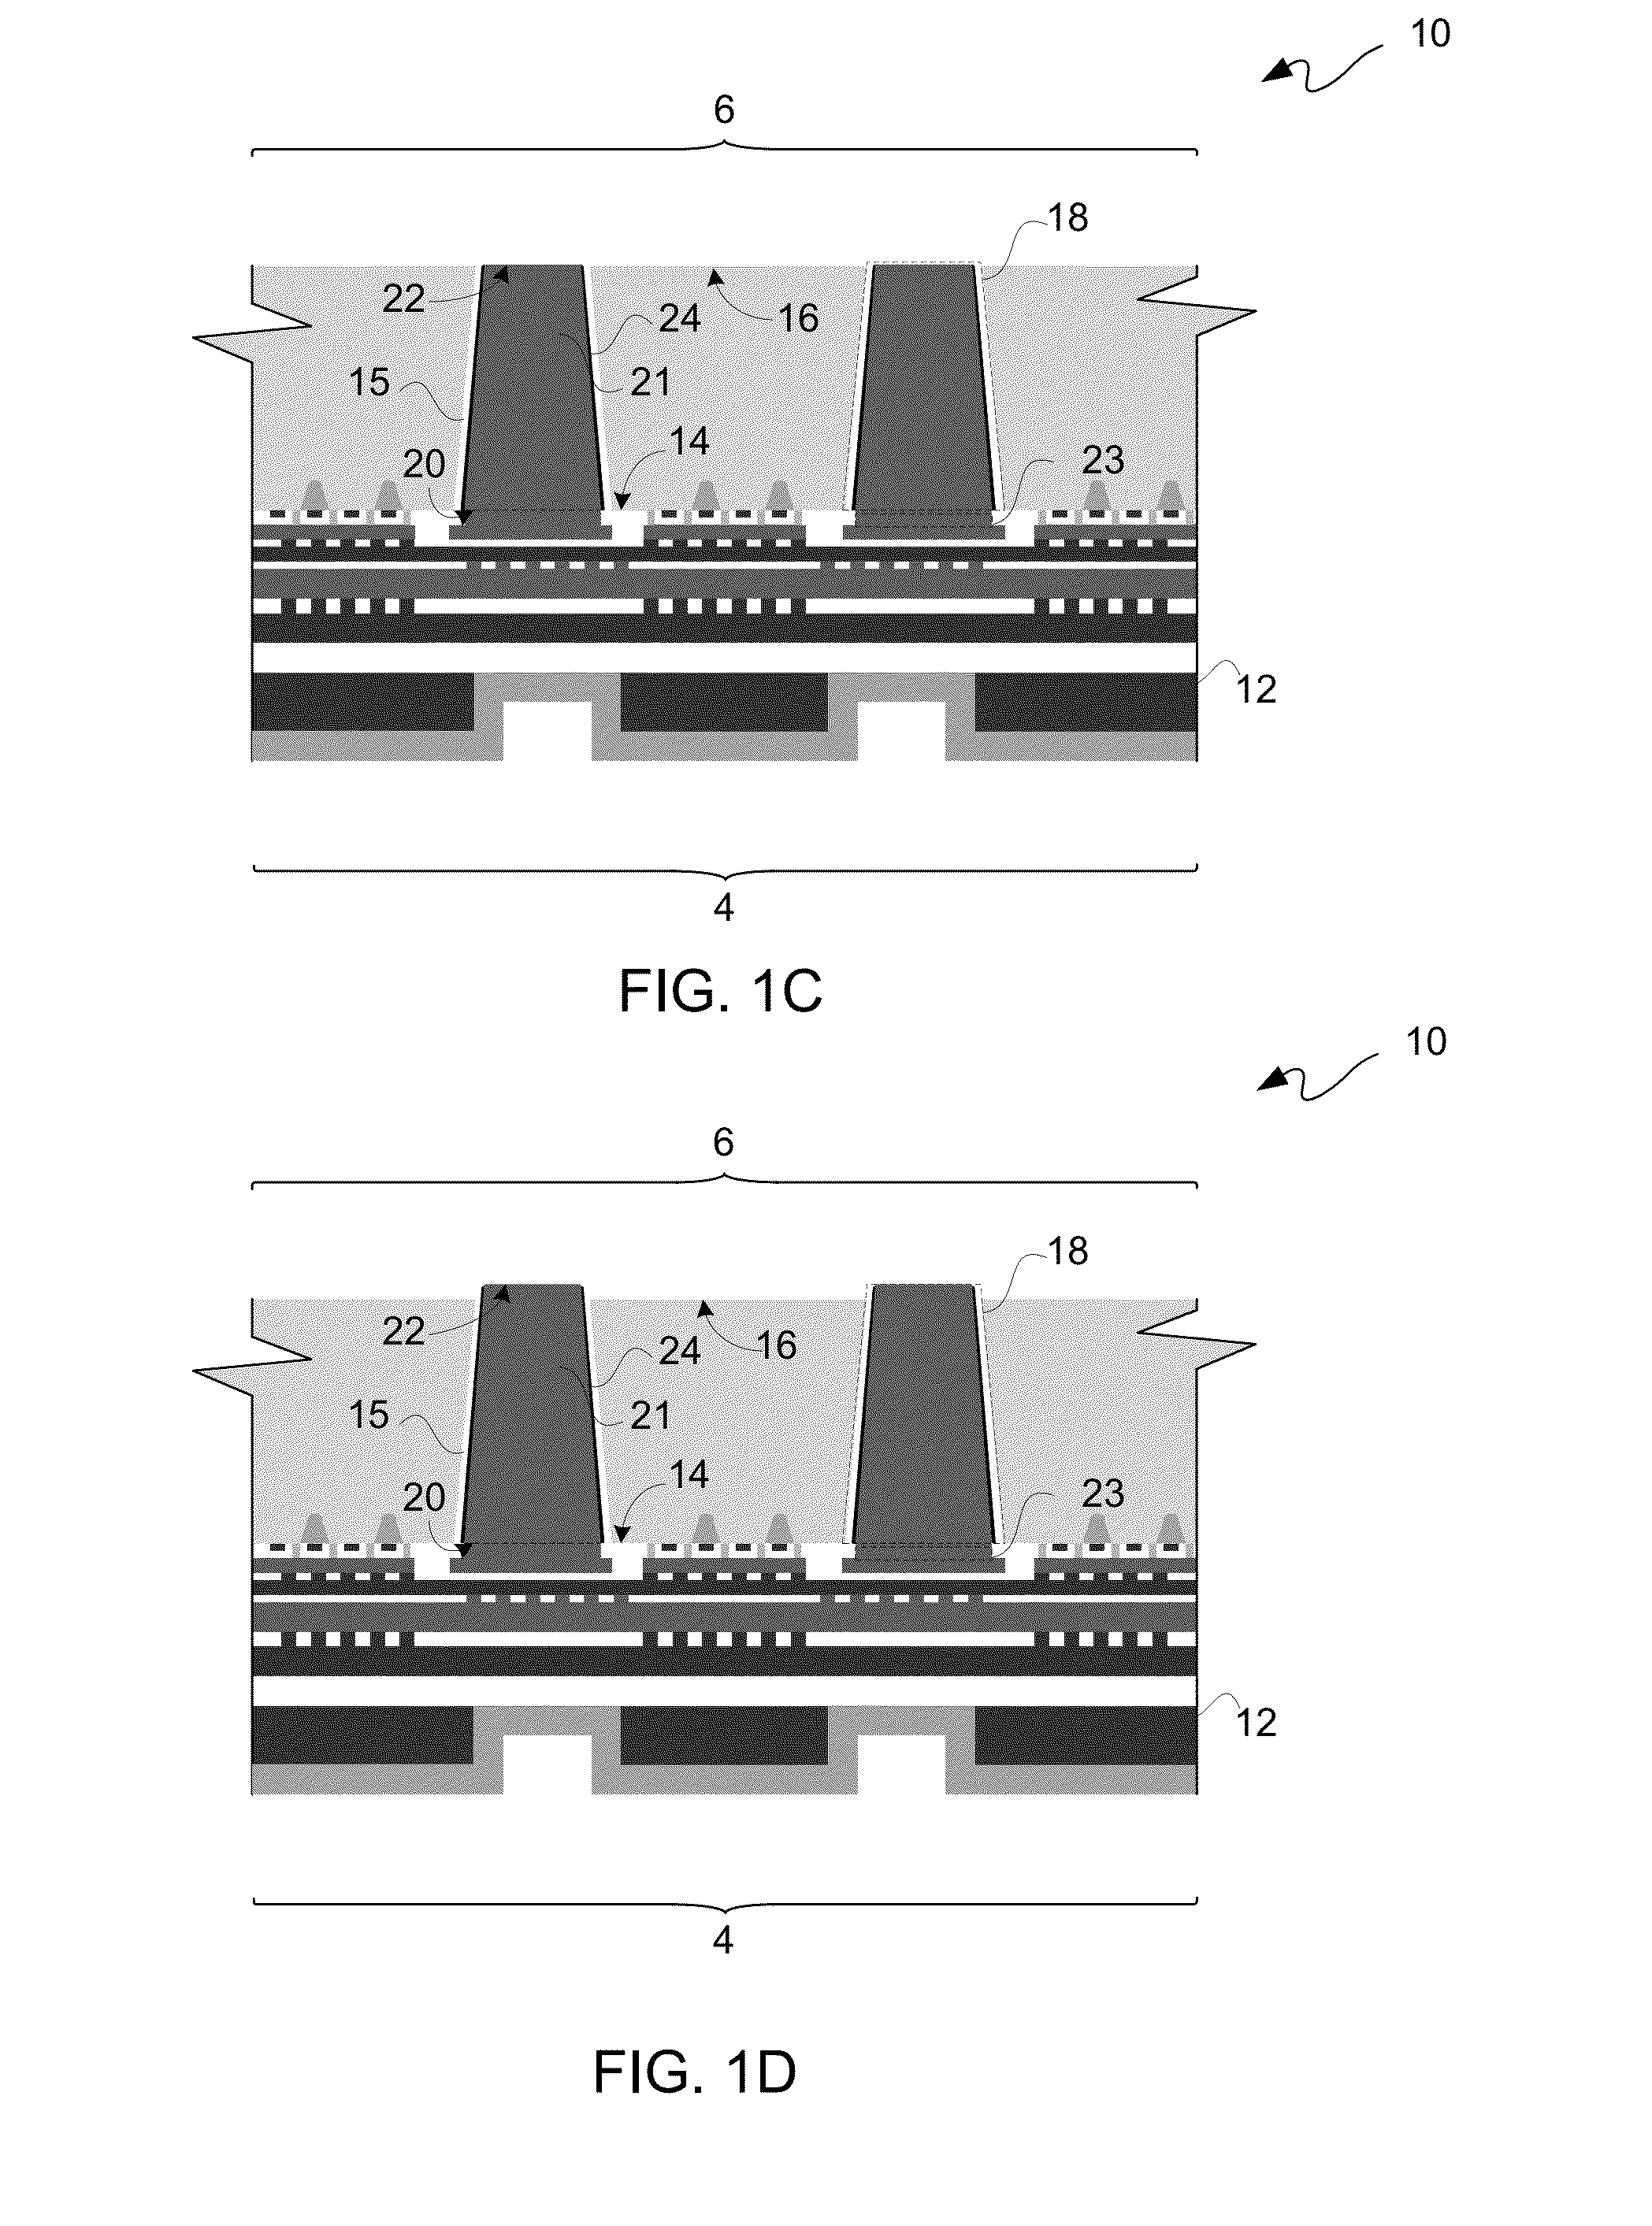 Multiple bond via arrays of different wire heights on a same substrate